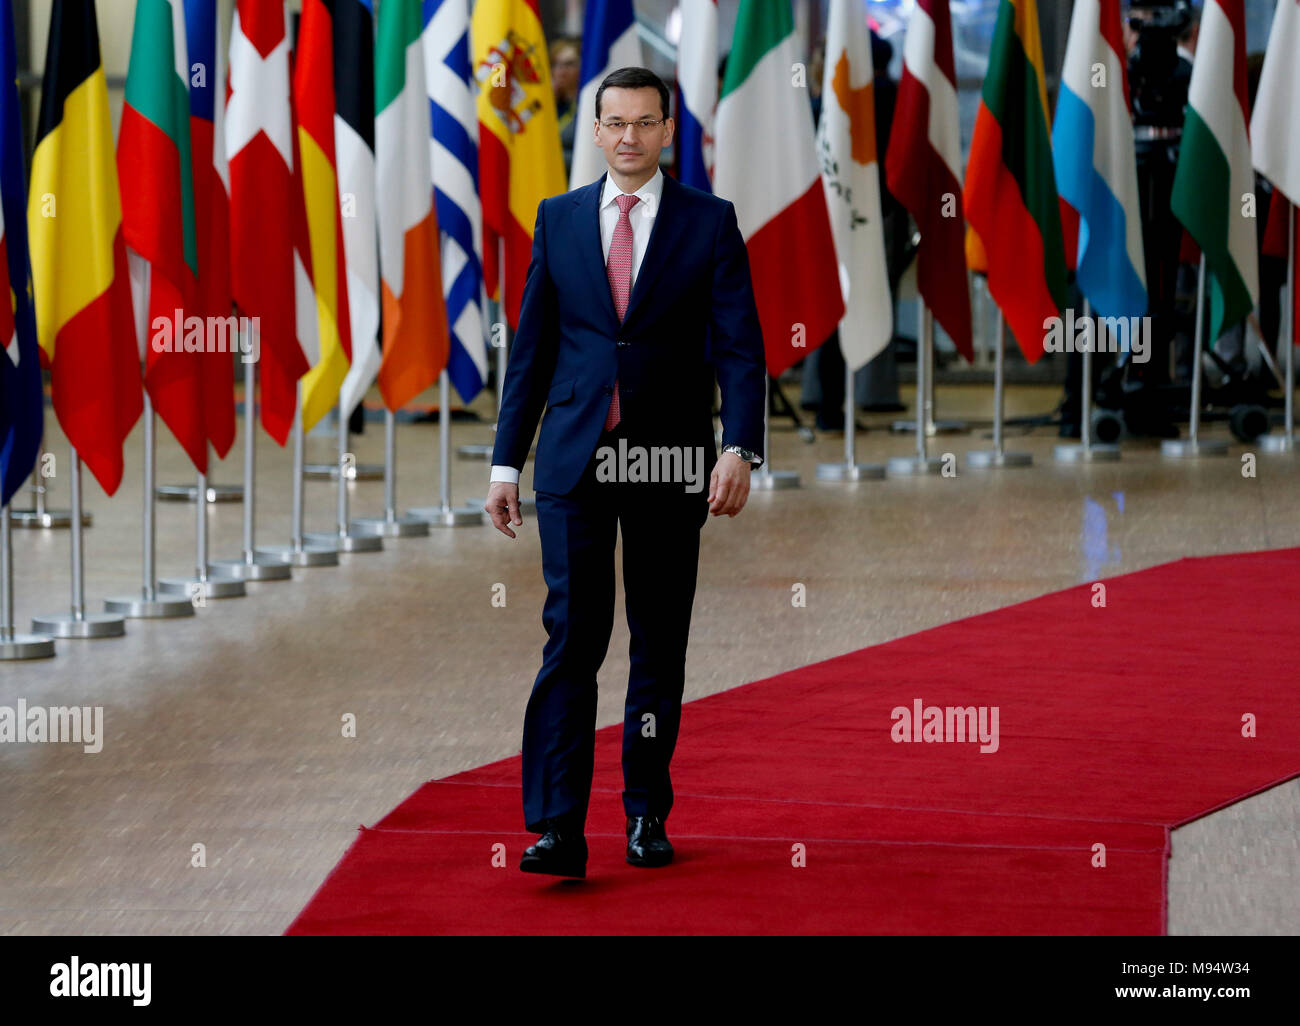 Brussels. 22nd Mar, 2018. Polish Prime Minister Mateusz Morawiecki arrives for the spring EU Summit at the EU headquarters in Brussels, Belgium, March. 22, 2018. Credit: Ye Pingfan/Xinhua/Alamy Live News Stock Photo